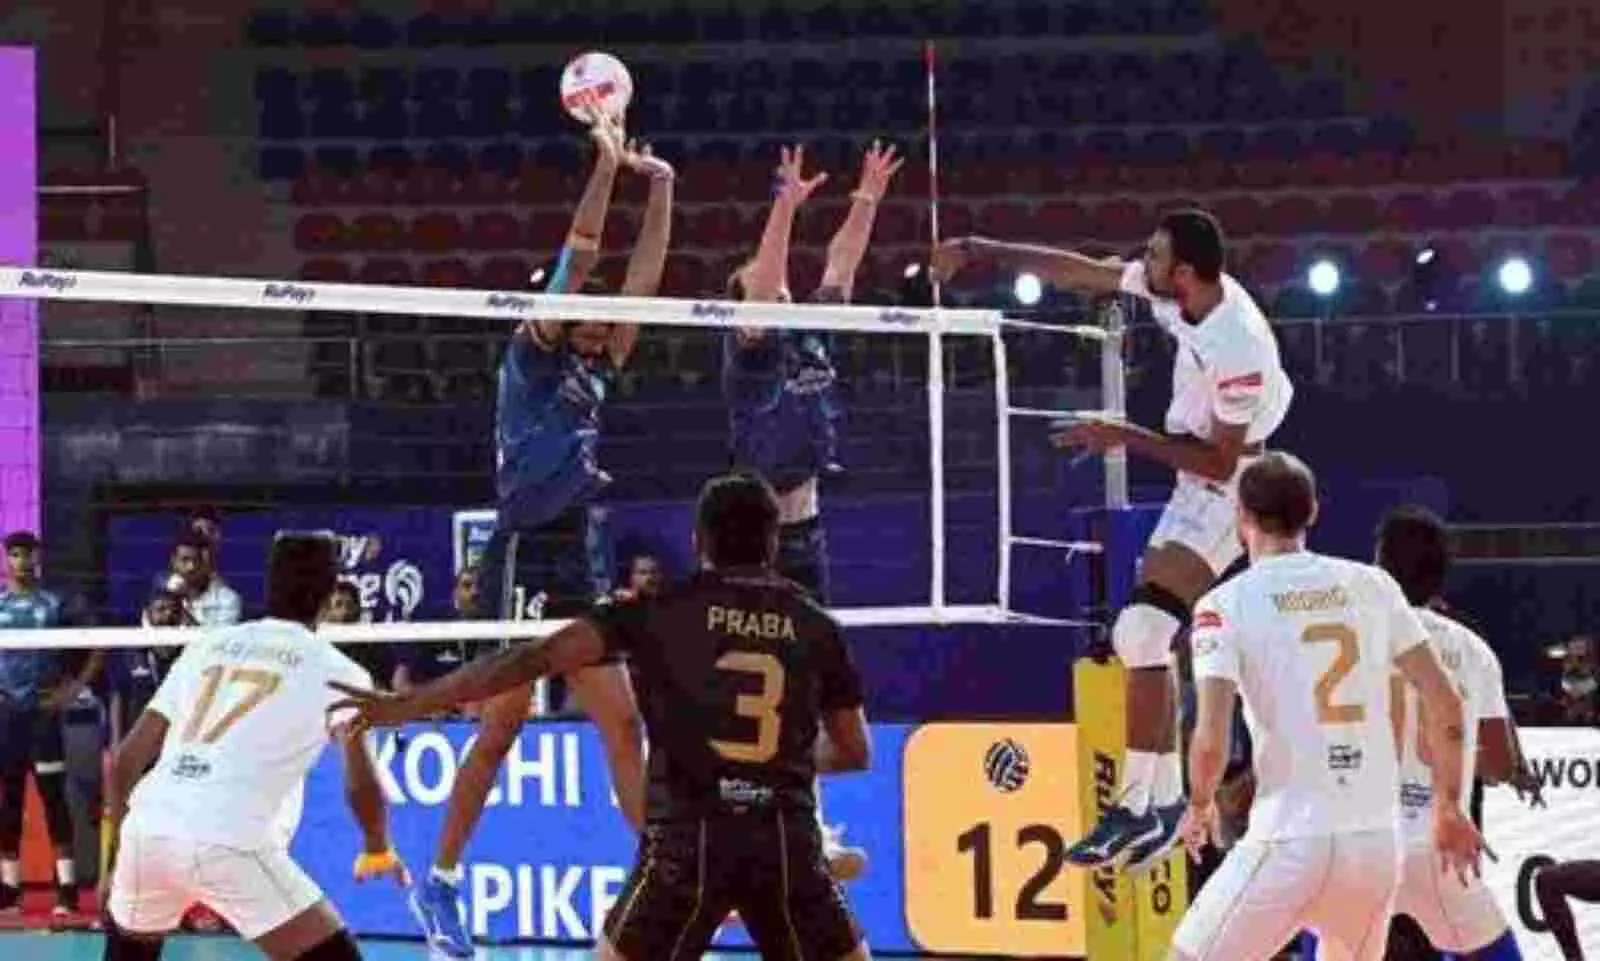 PVL: Kochi ends campaign with yet another 3-2 loss